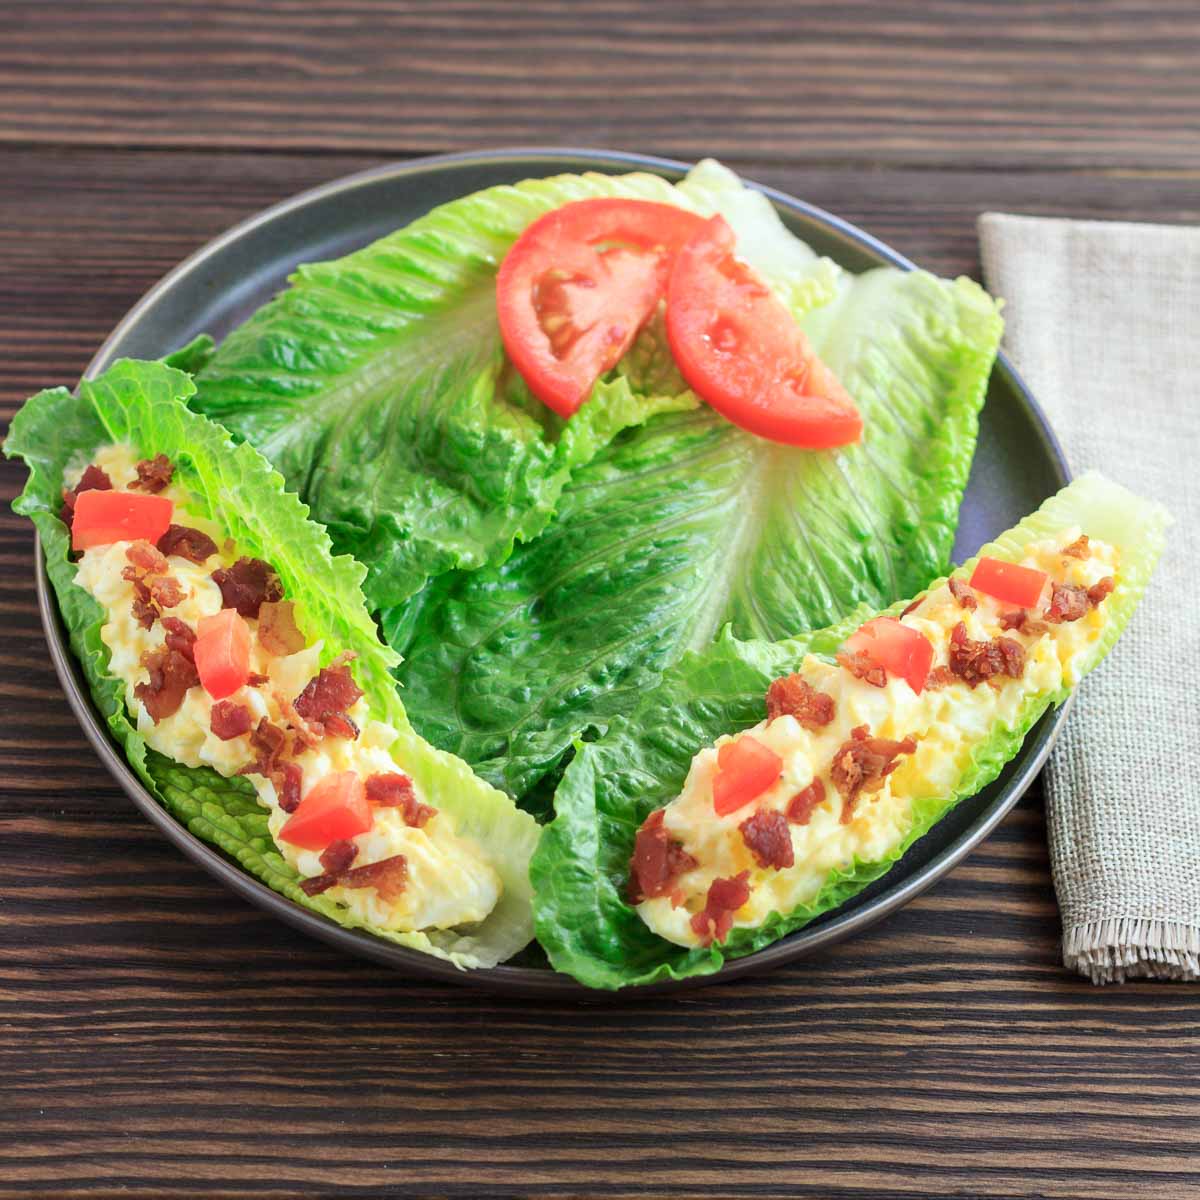 Egg salad bacon and tomato in 2 lettuce boats.